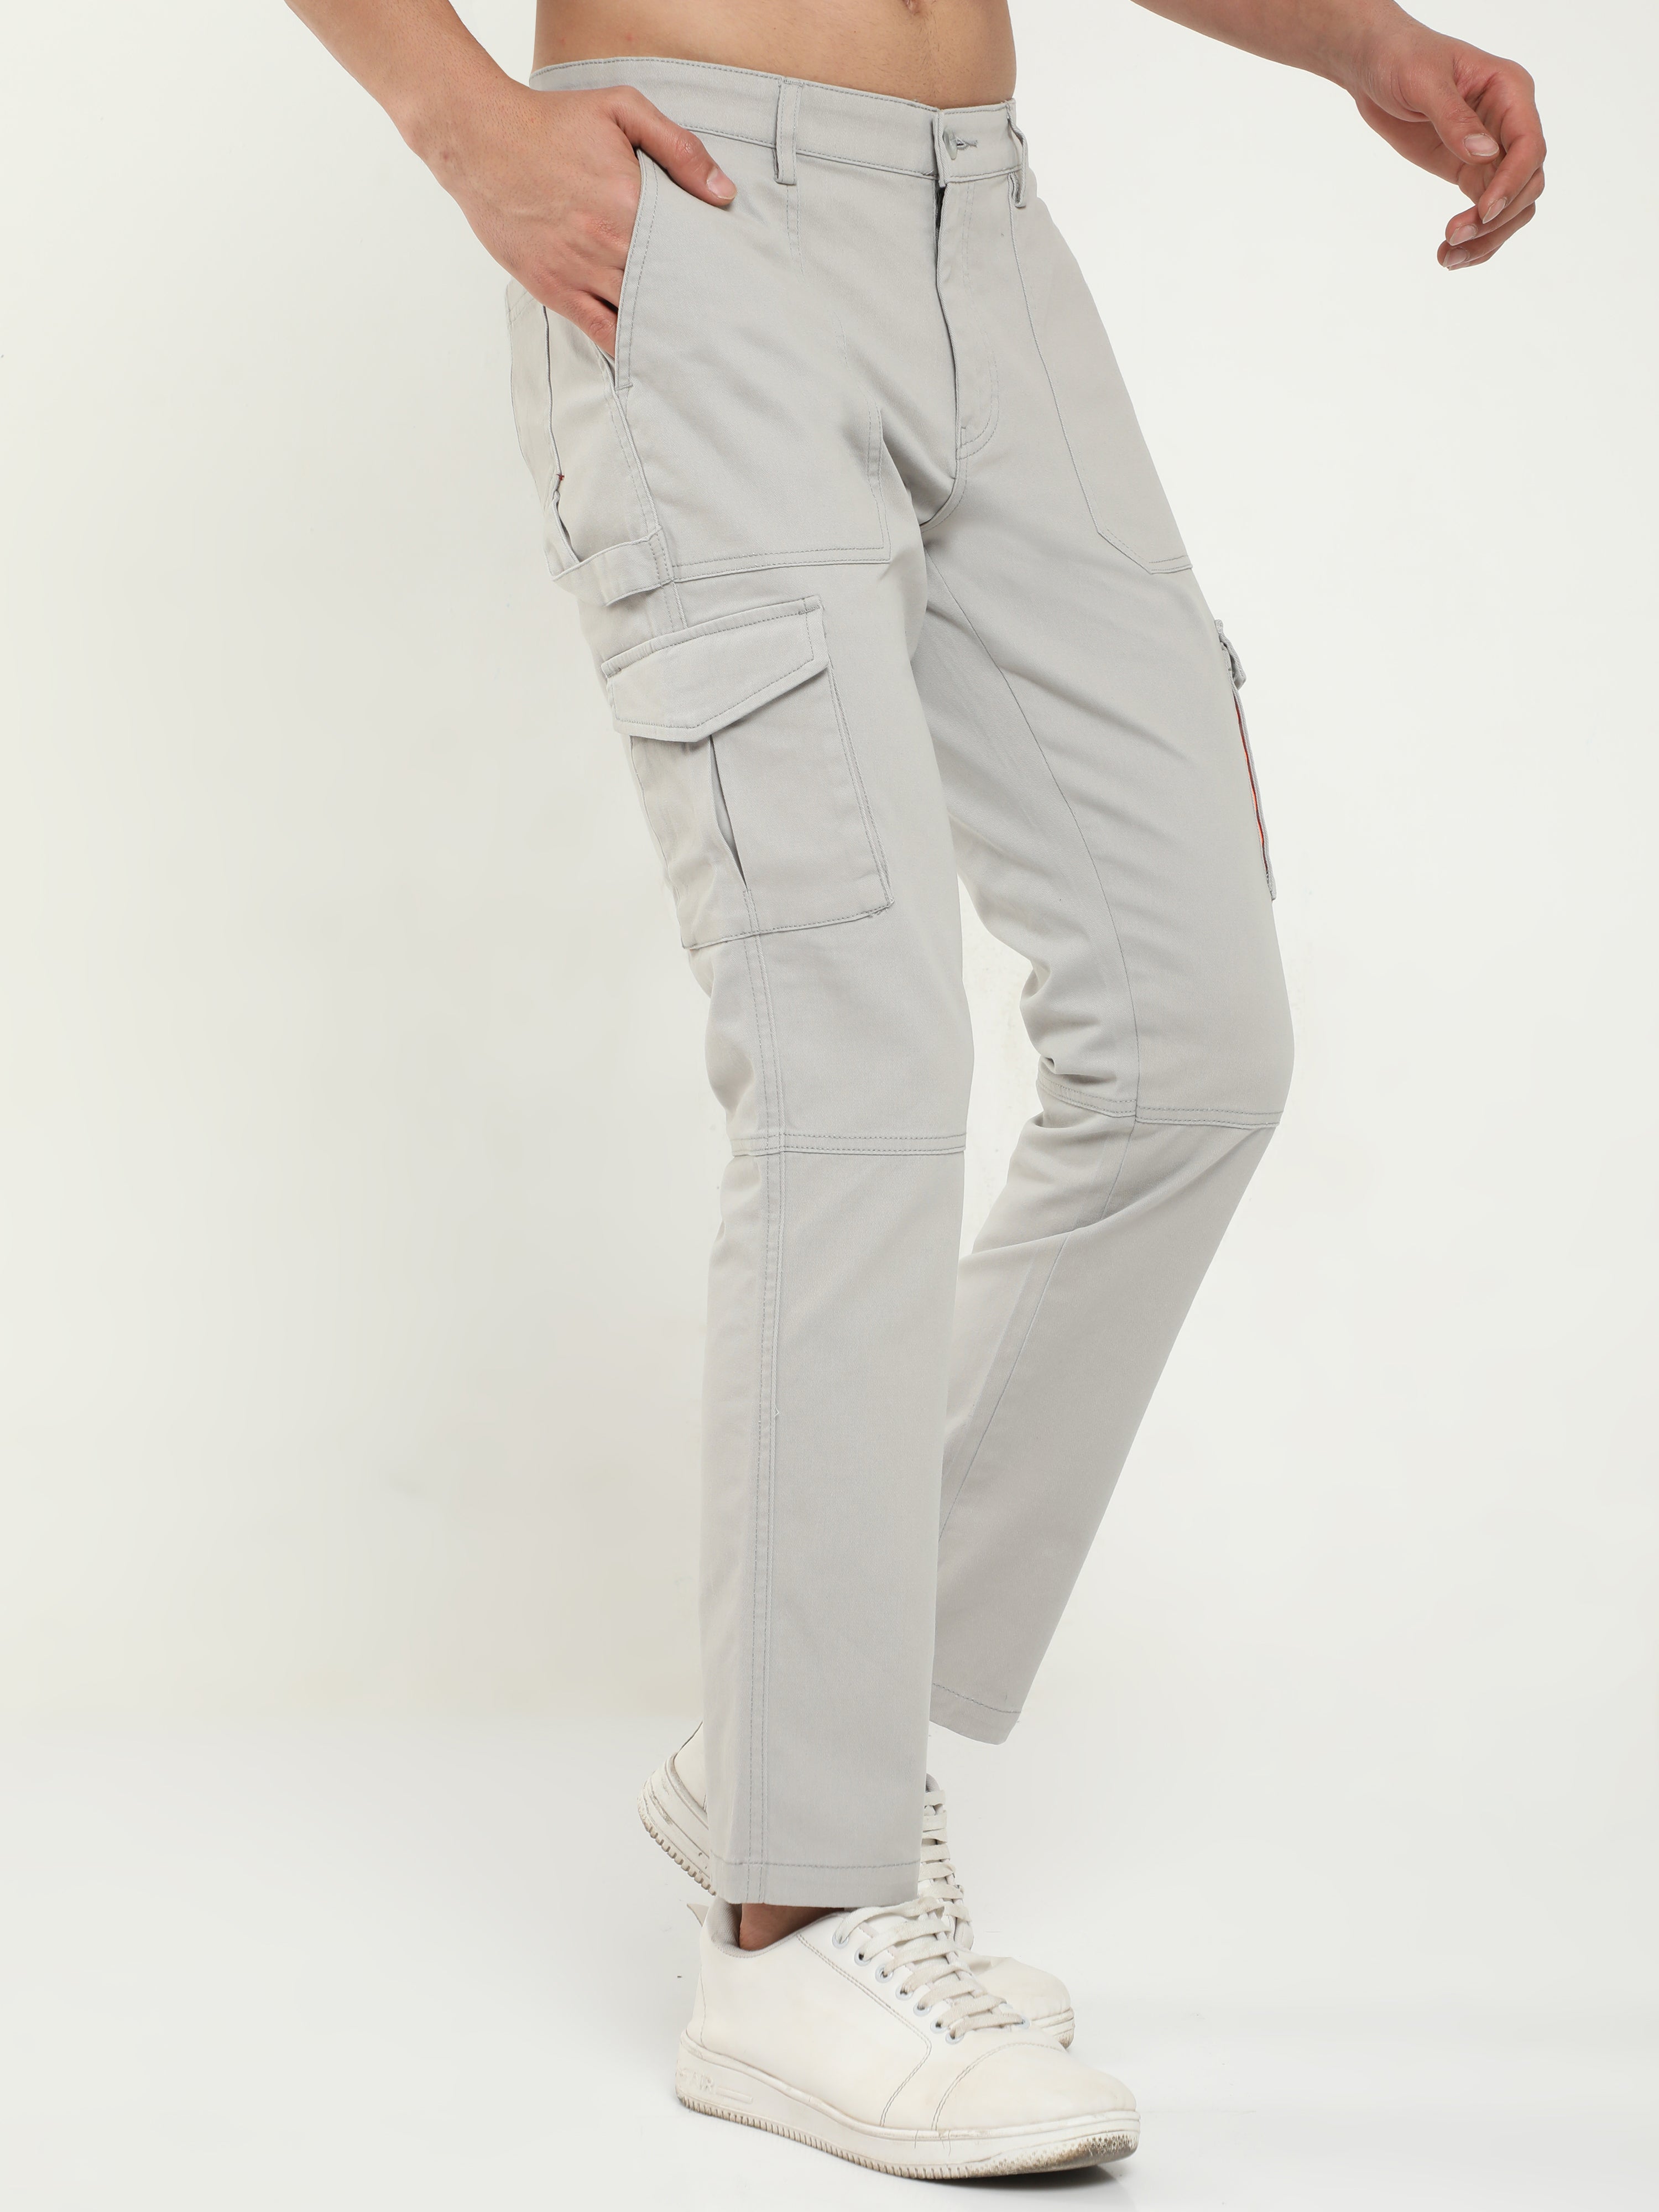 Buy Beige Trousers & Pants for Men by The Indian Garage Co Online | Ajio.com